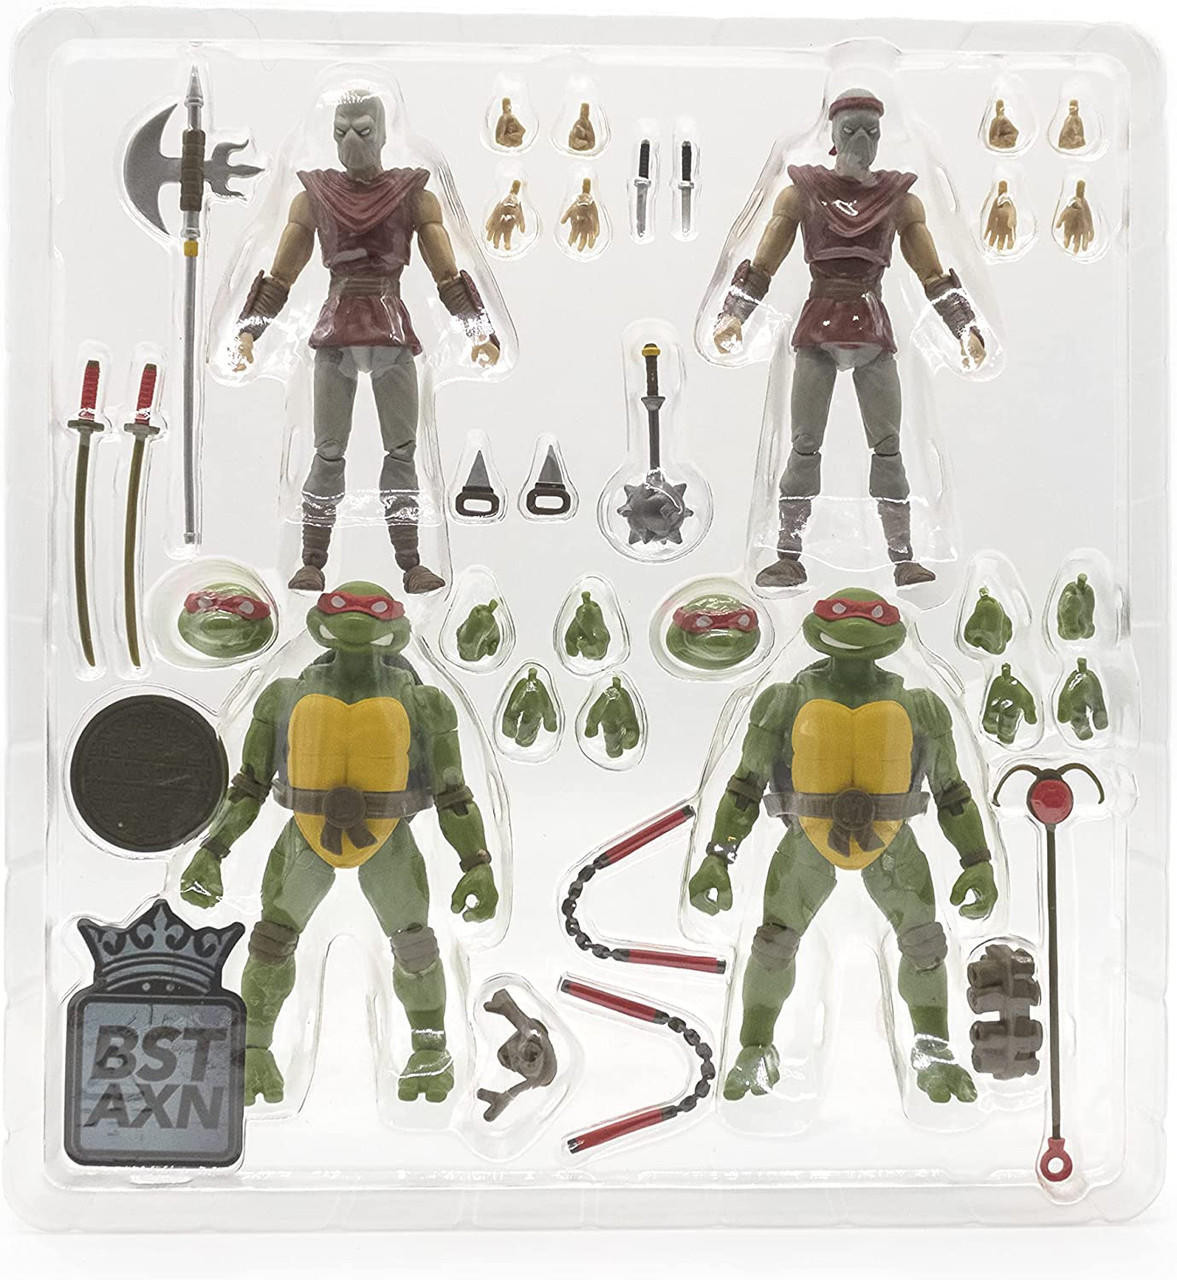 TMNT Shredder & Foot Soldier Shadows 2-Pack - The Loyal Subjects BST AXN 5  Action Figure 